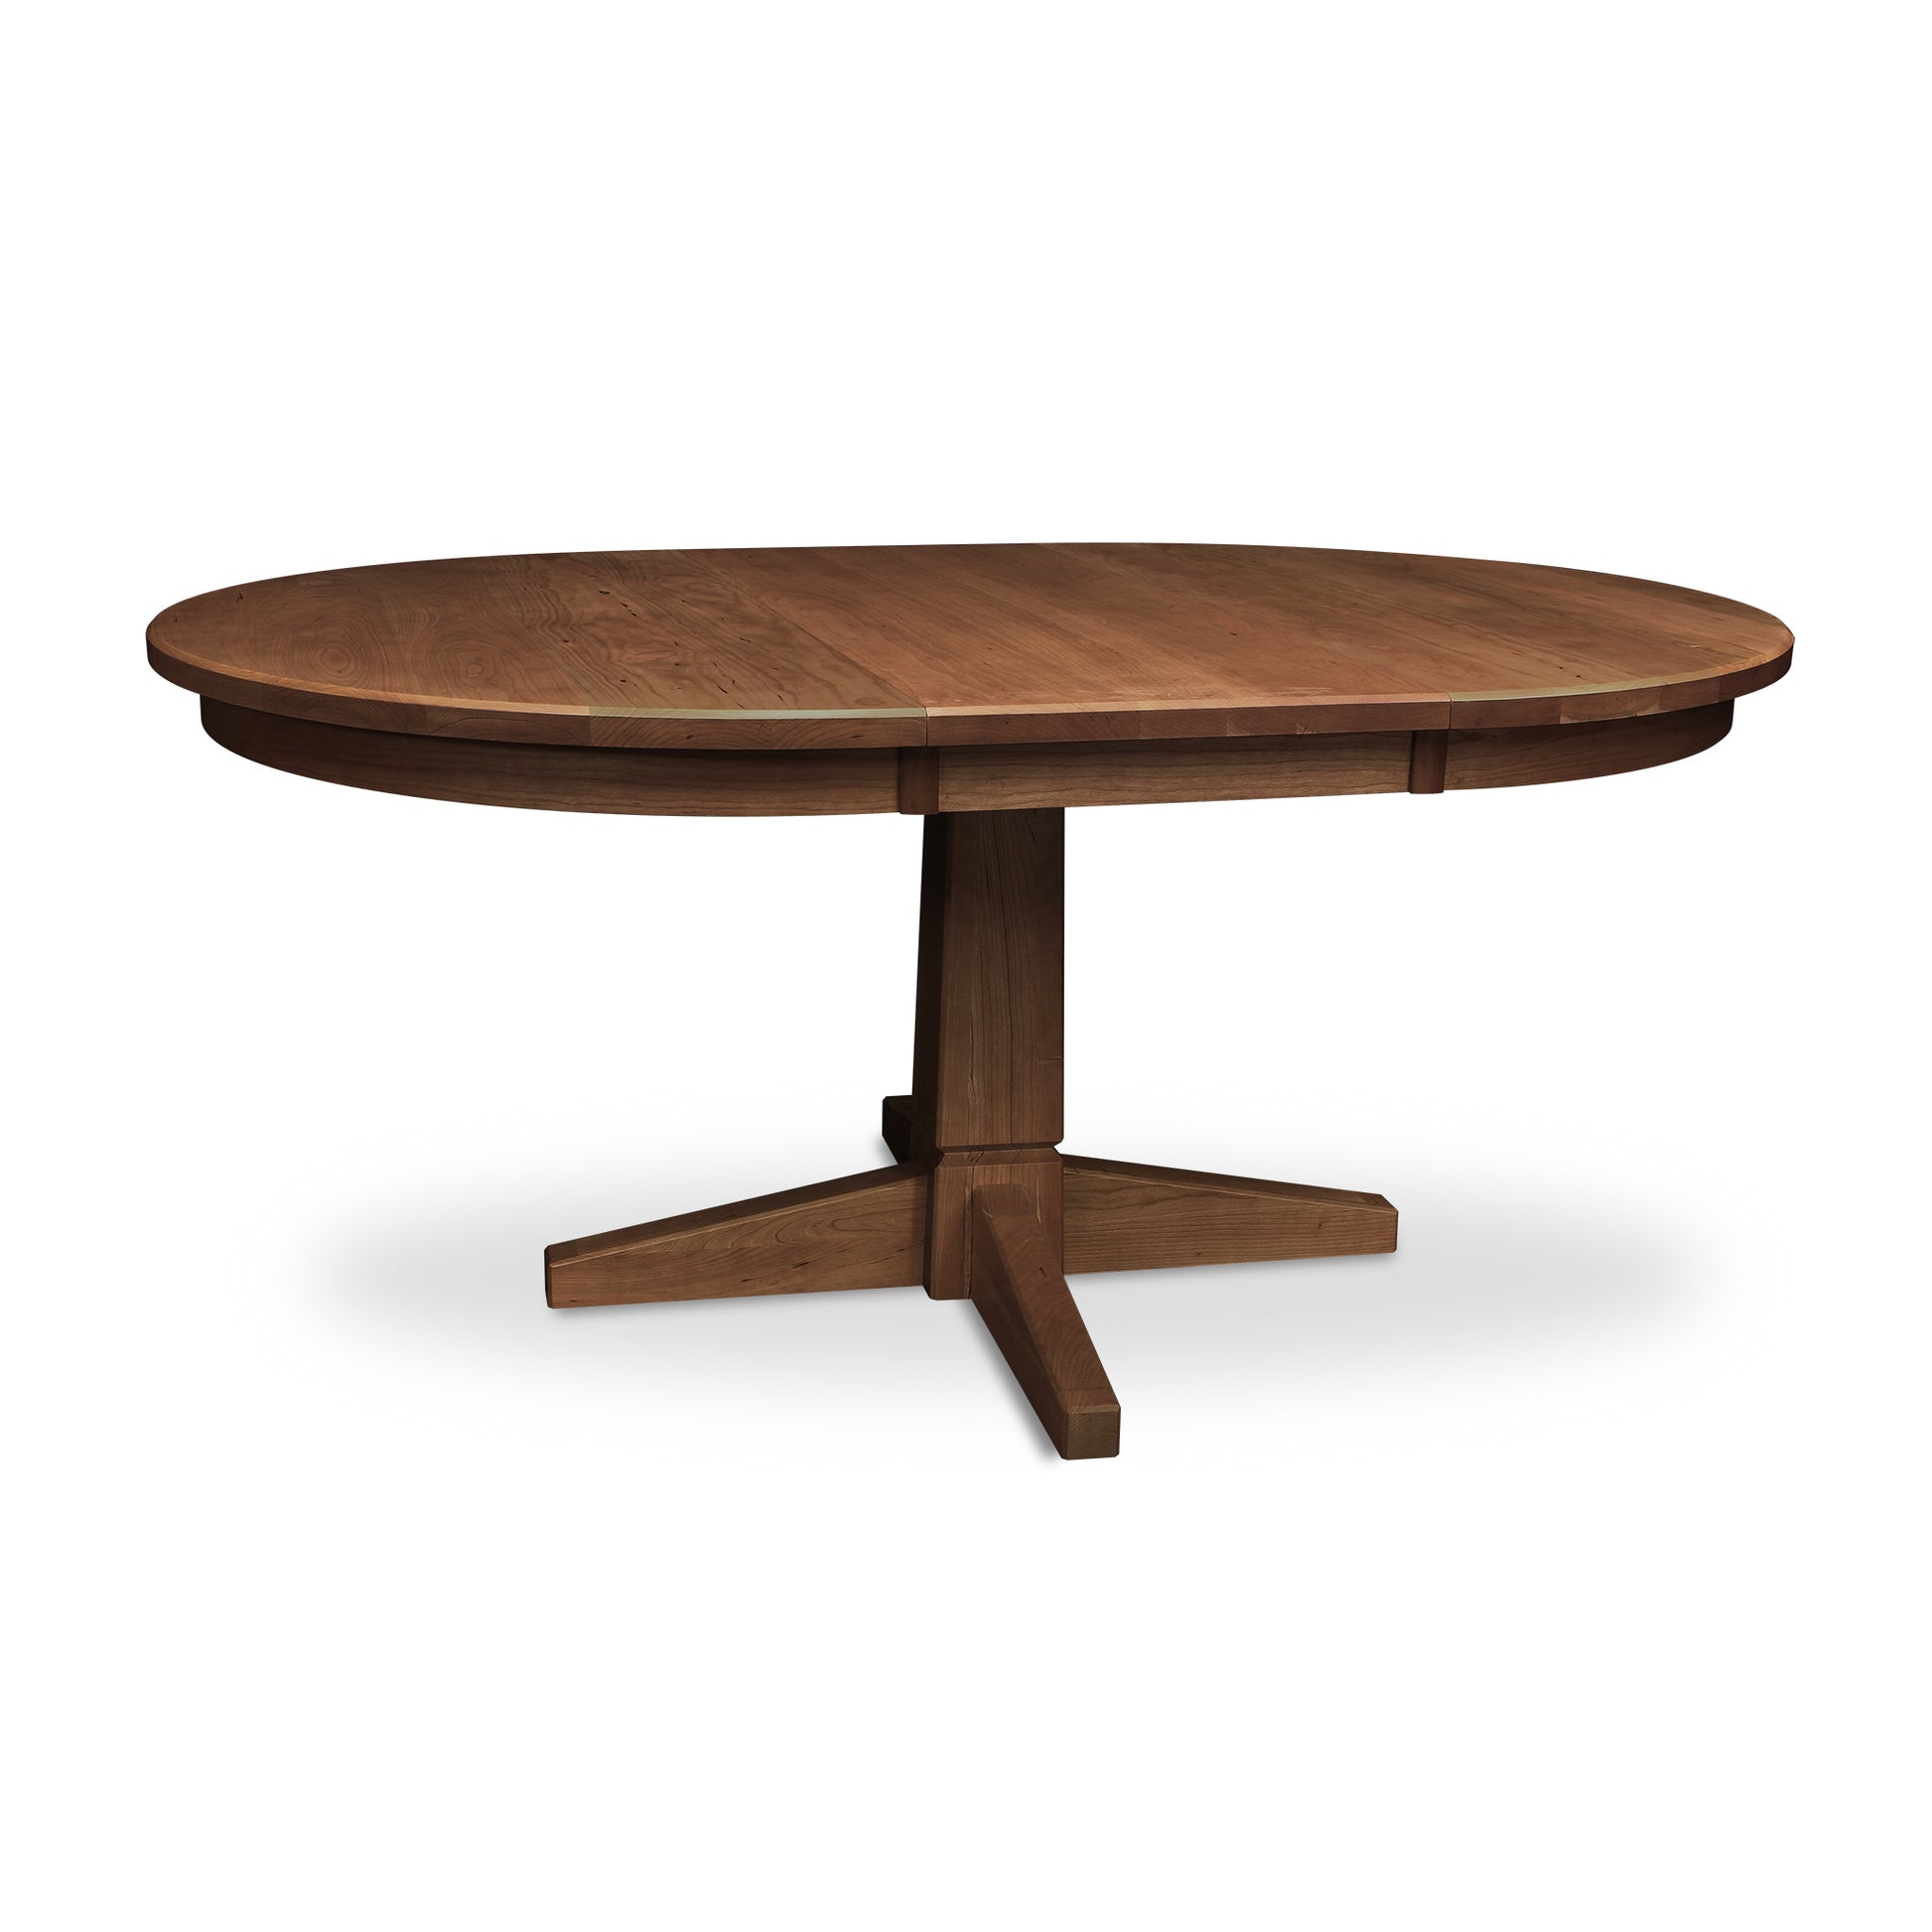 A round dining table with a Lyndon Furniture Natural Vermont Single Pedestal Round Extension Table, perfect for an eco-friendly dining room.